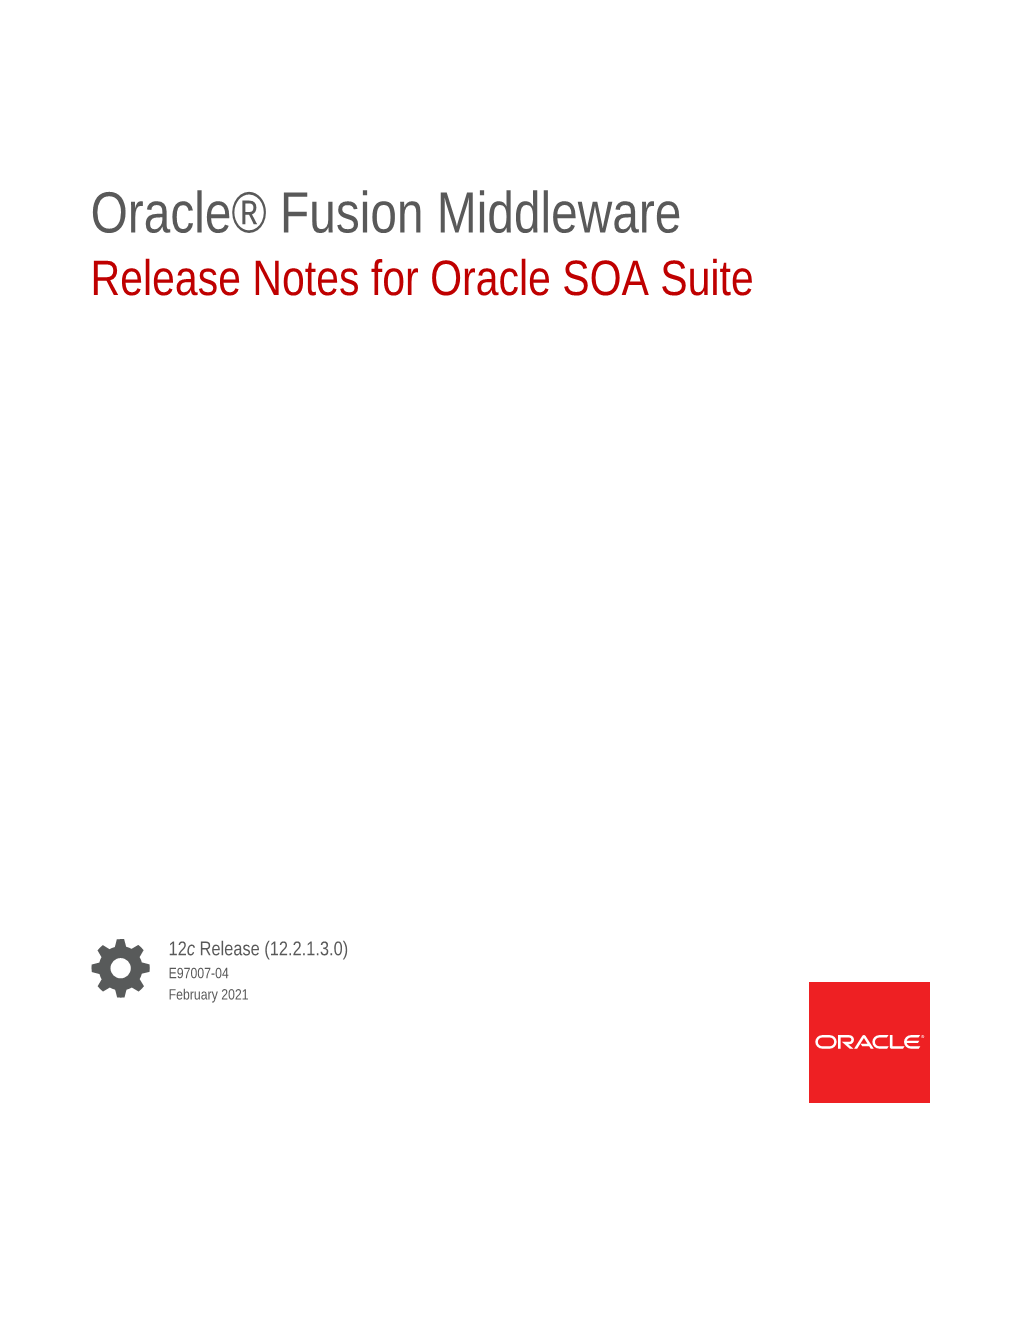 Release Notes for Oracle SOA Suite